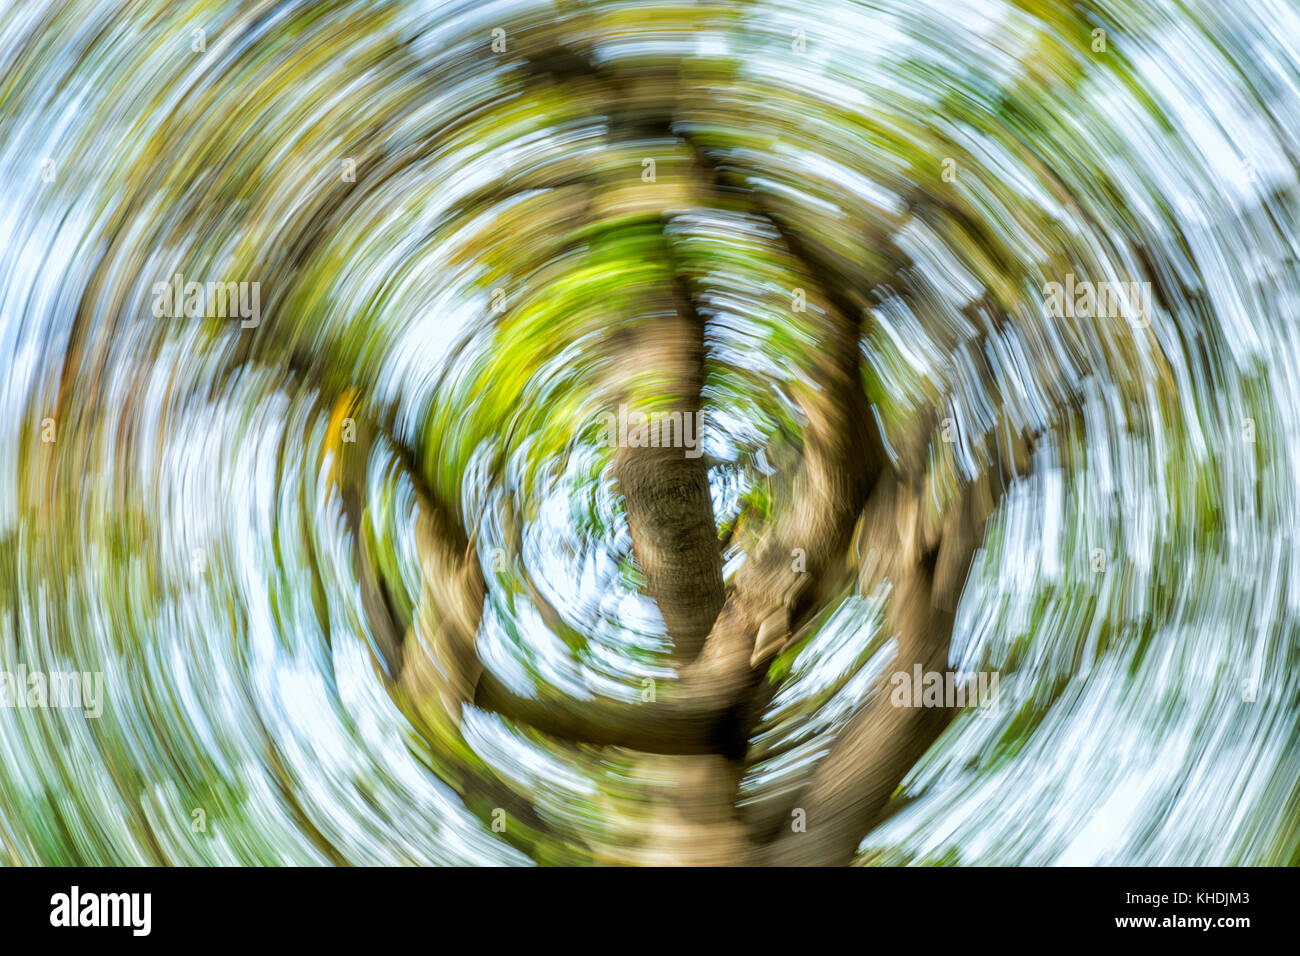 Abstract Green Swirling Tree, Dizzy Stock Photo